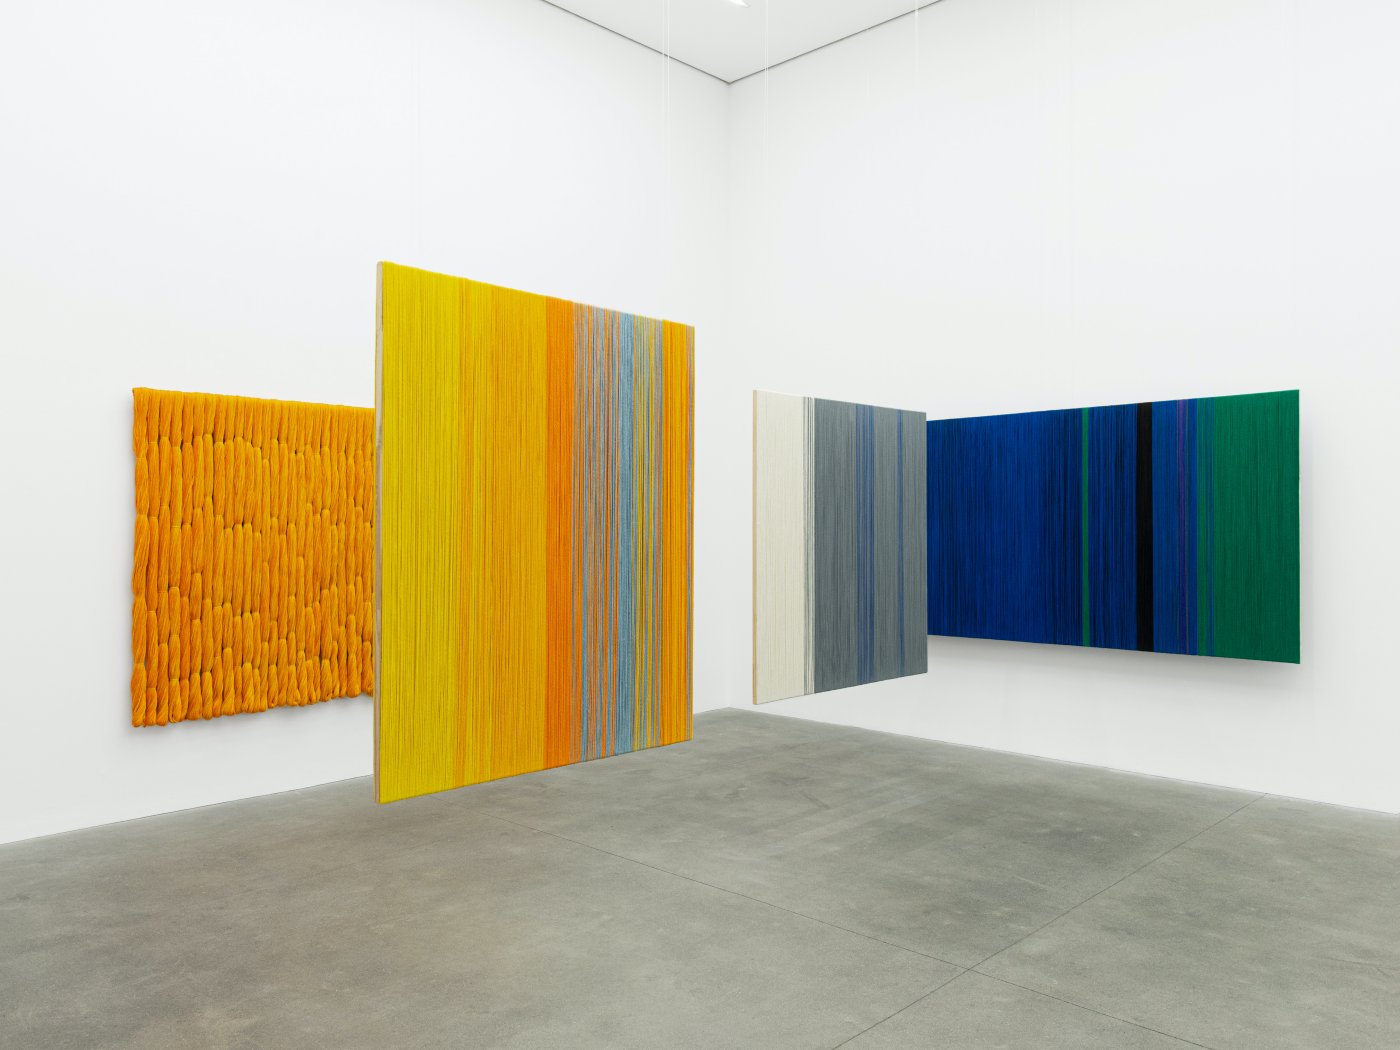 Installation image for Sheila Hicks: Music to My Eyes, at Alison Jacques